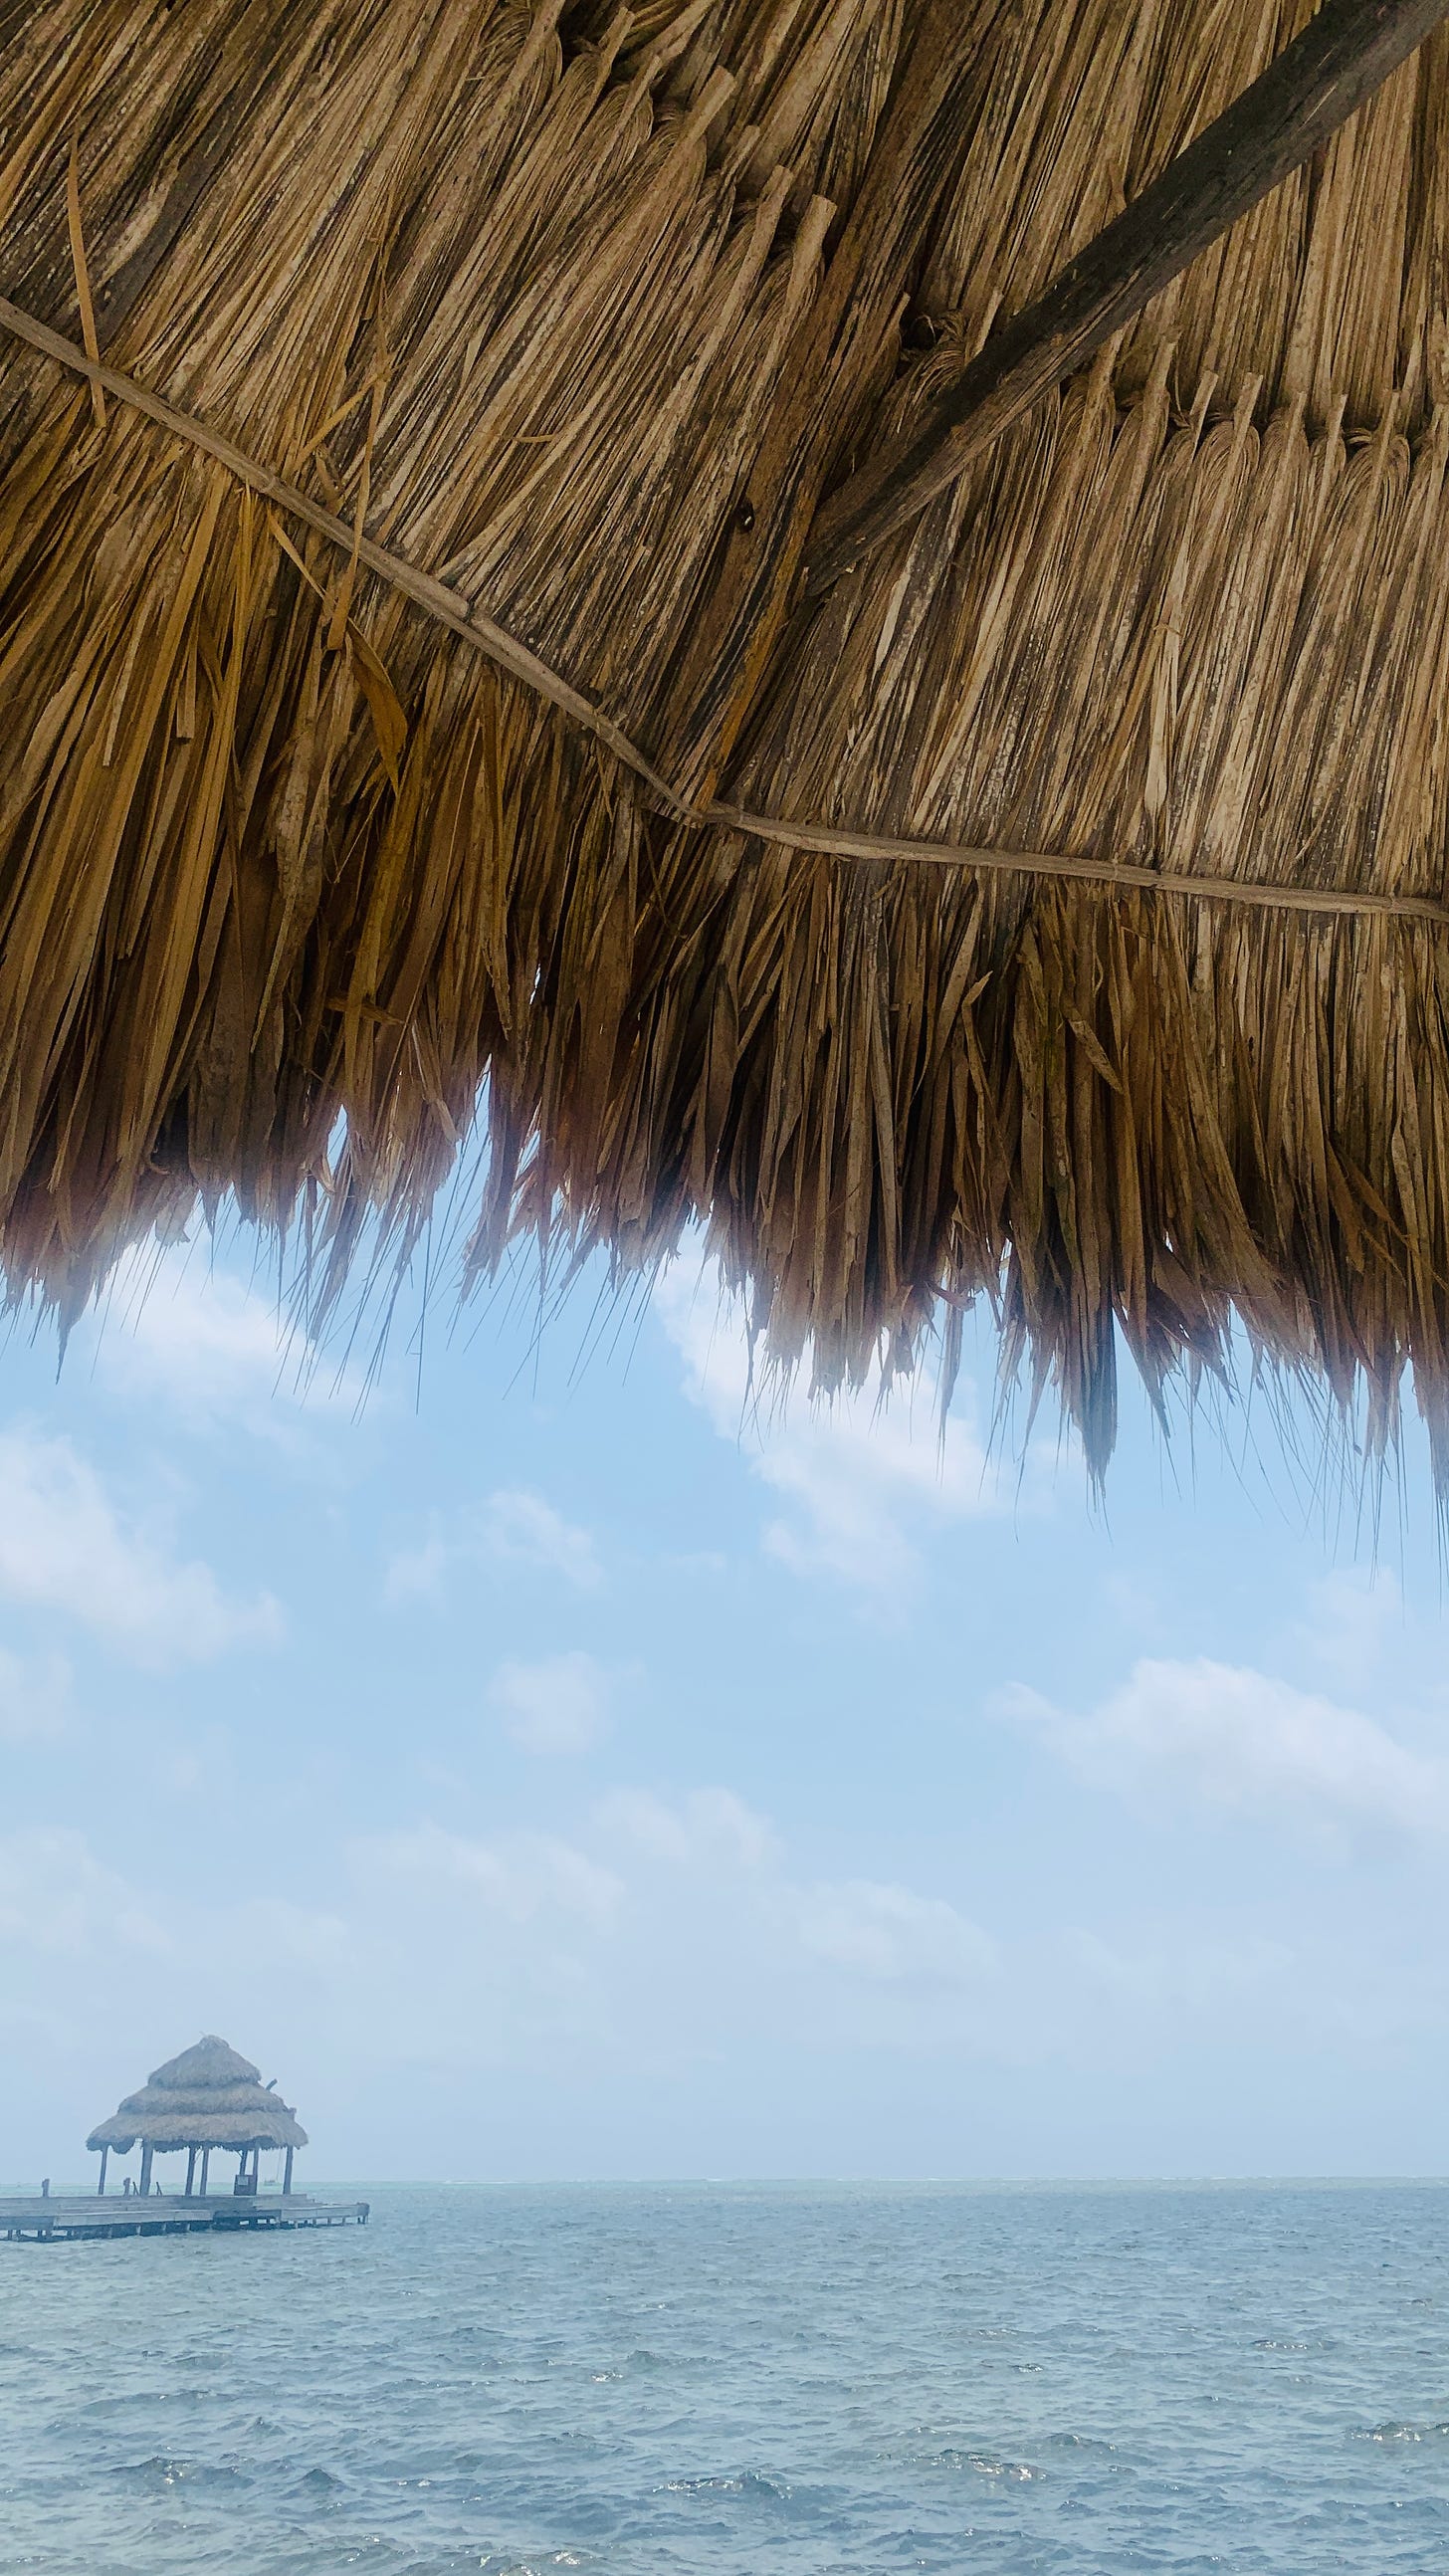 the ocean and the sky, from the point of view of sitting under a thatched roof